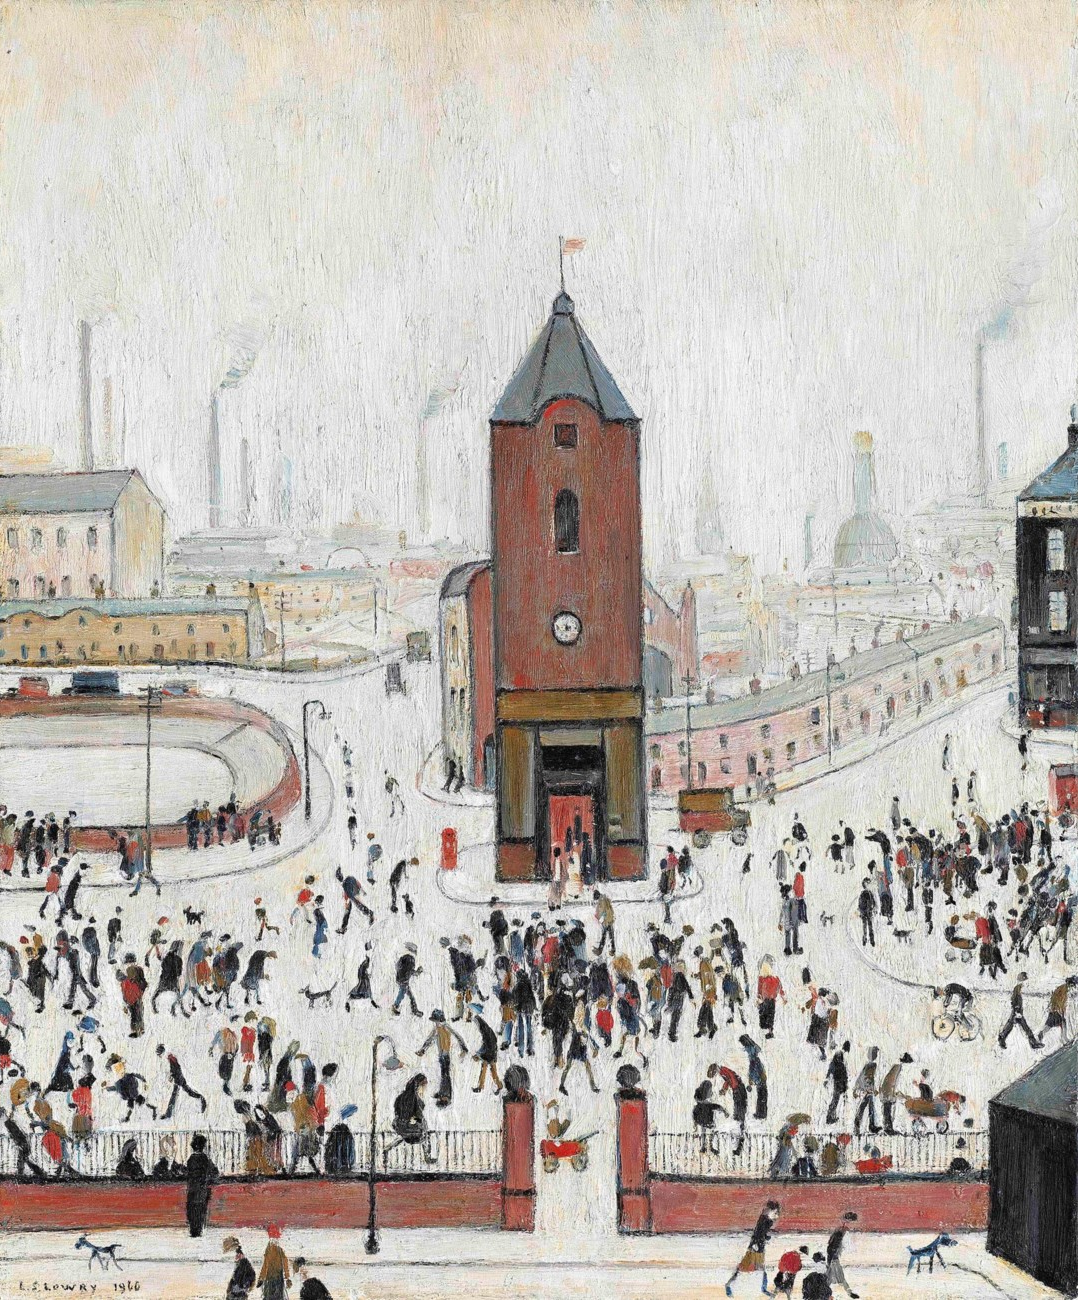 Town Centre (1966) by Laurence Stephen Lowry (1887 - 1976), English artist.